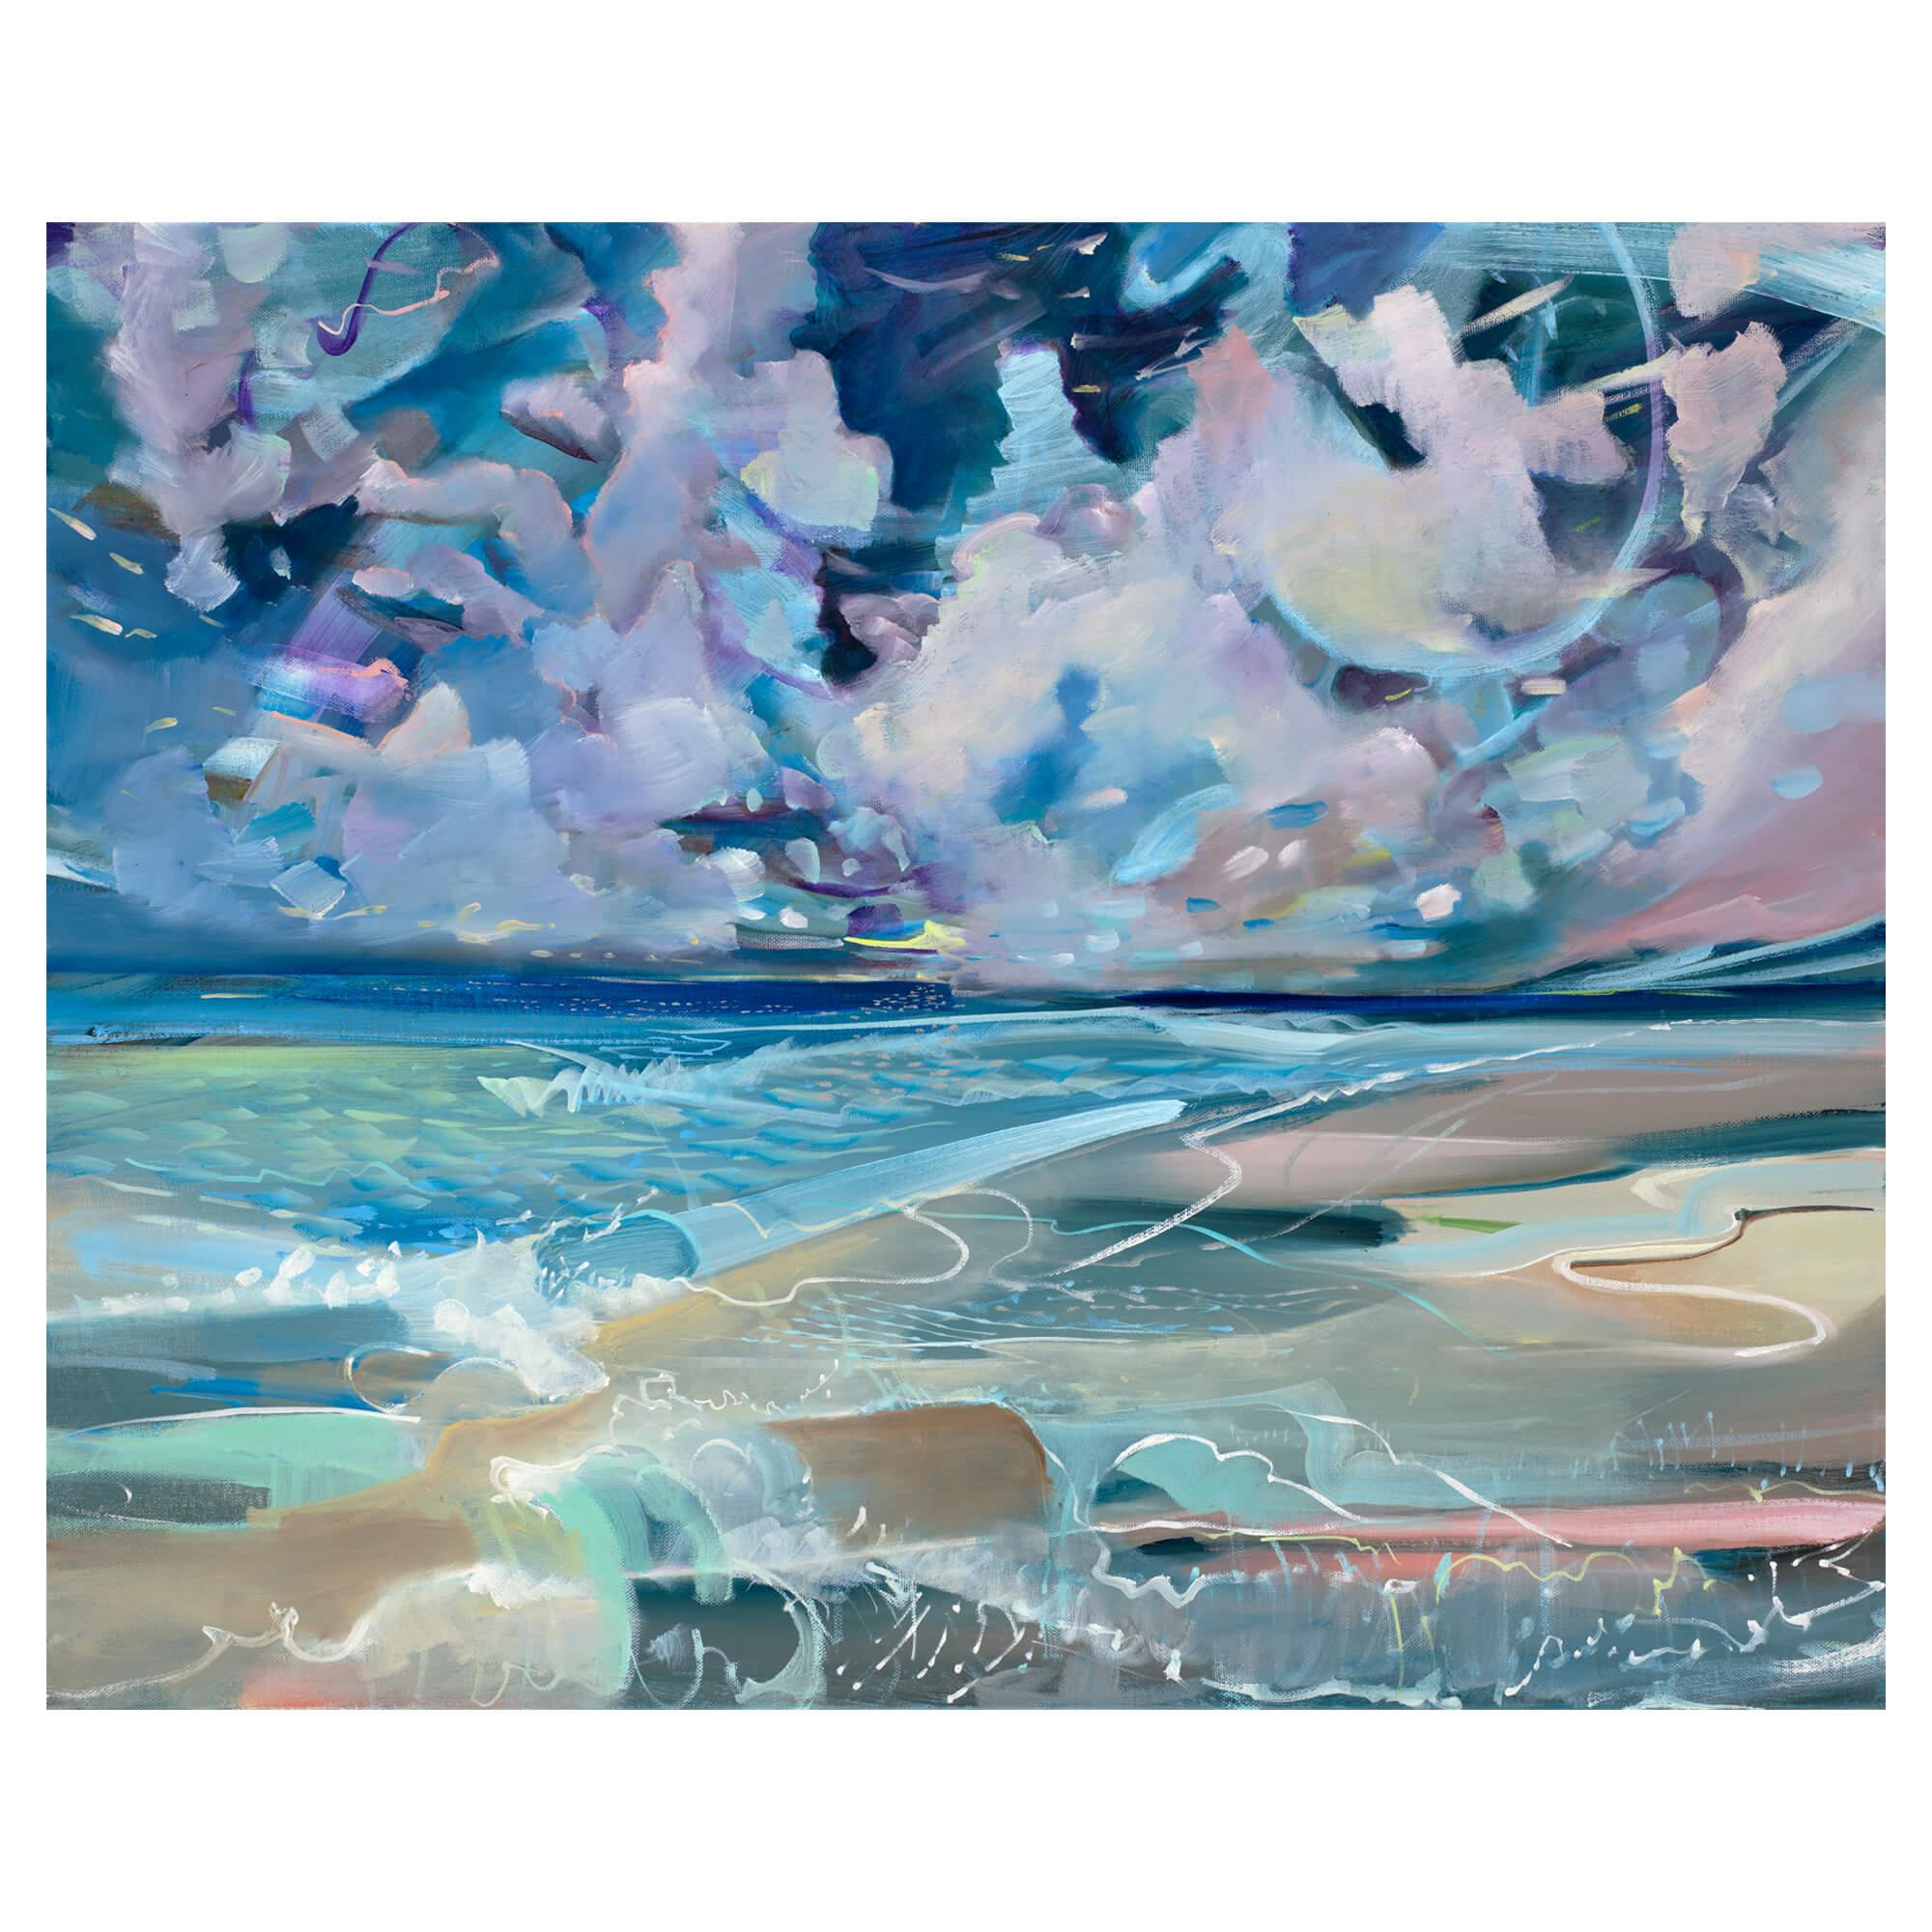 Original painting featuring an abstract seascape showing Hawaii's tranquil waters and pastel-colored sky using oil on canvas by famous Hawaii artist Saumolia Puapuaga